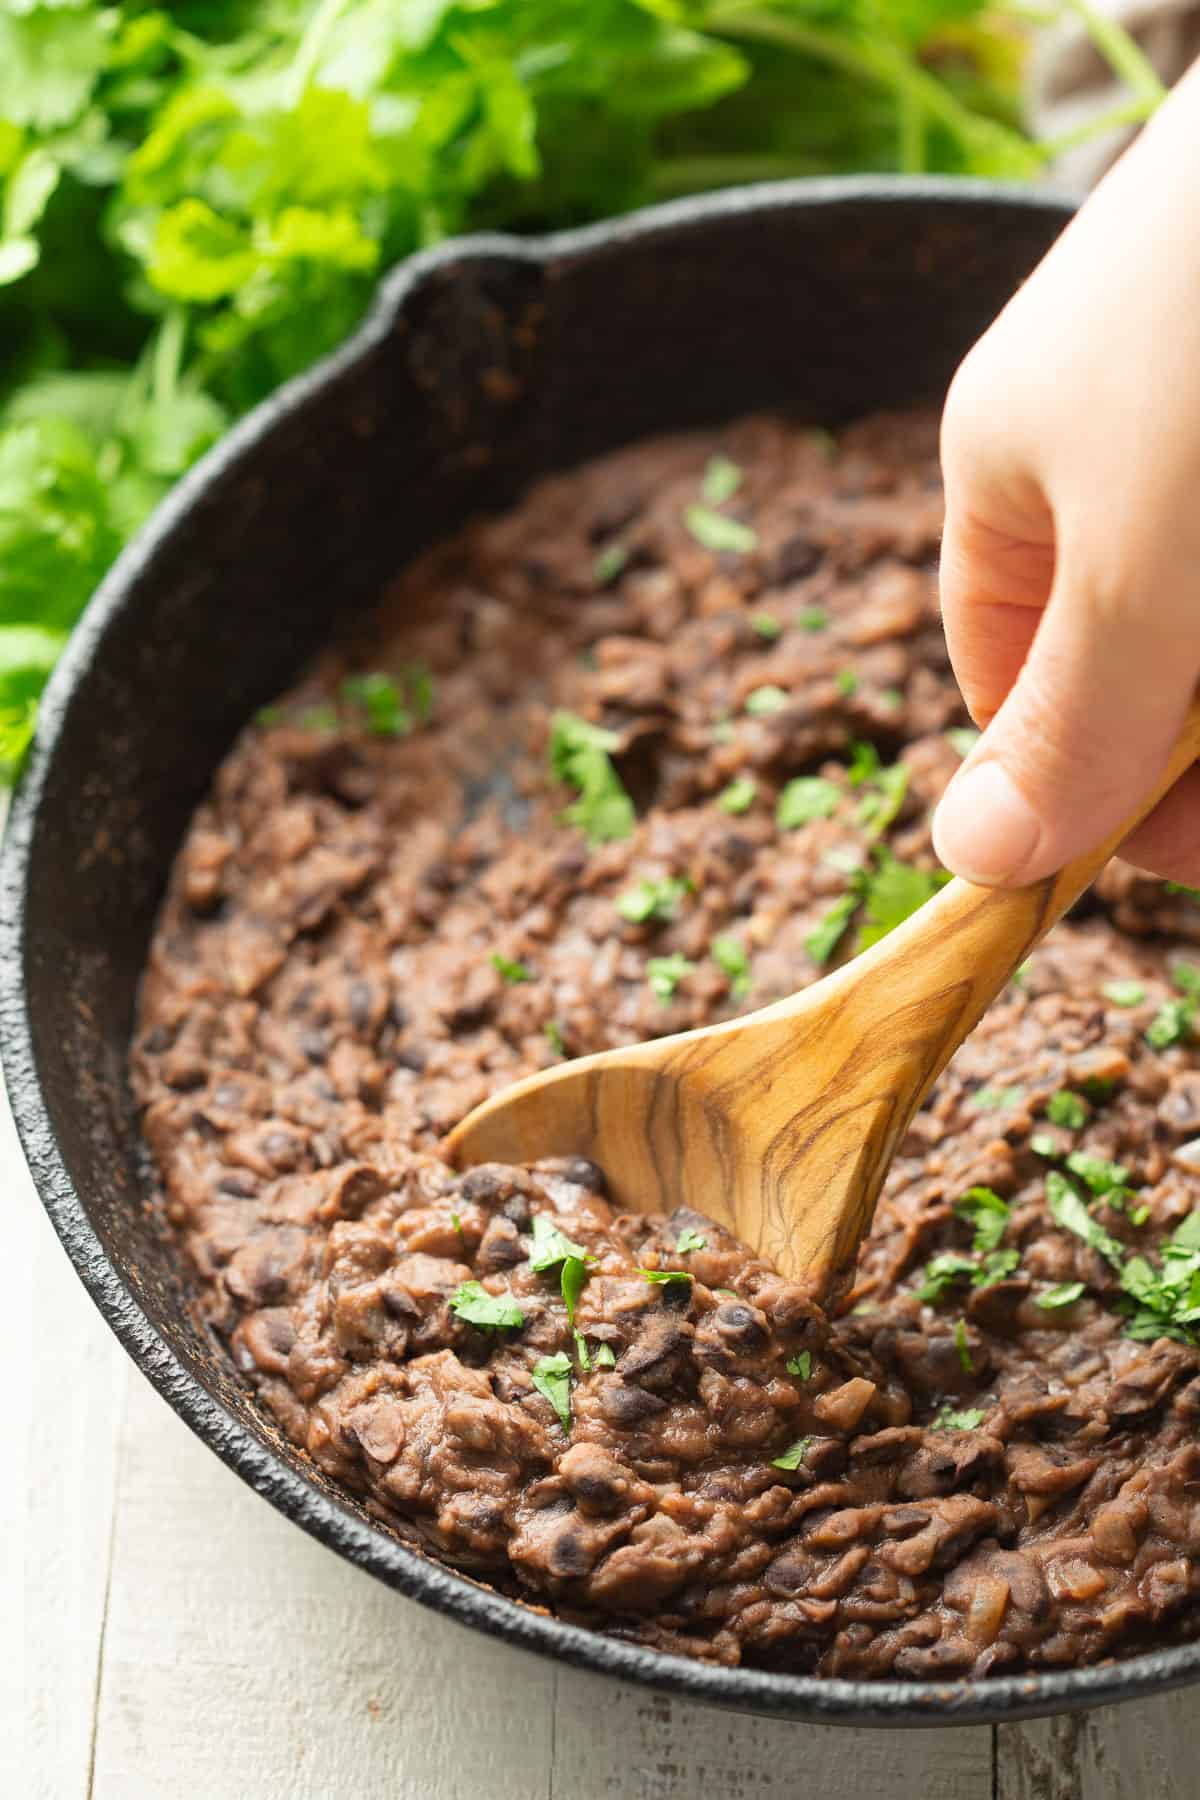 Hand with spoon scooping refried black beans from a skillet.